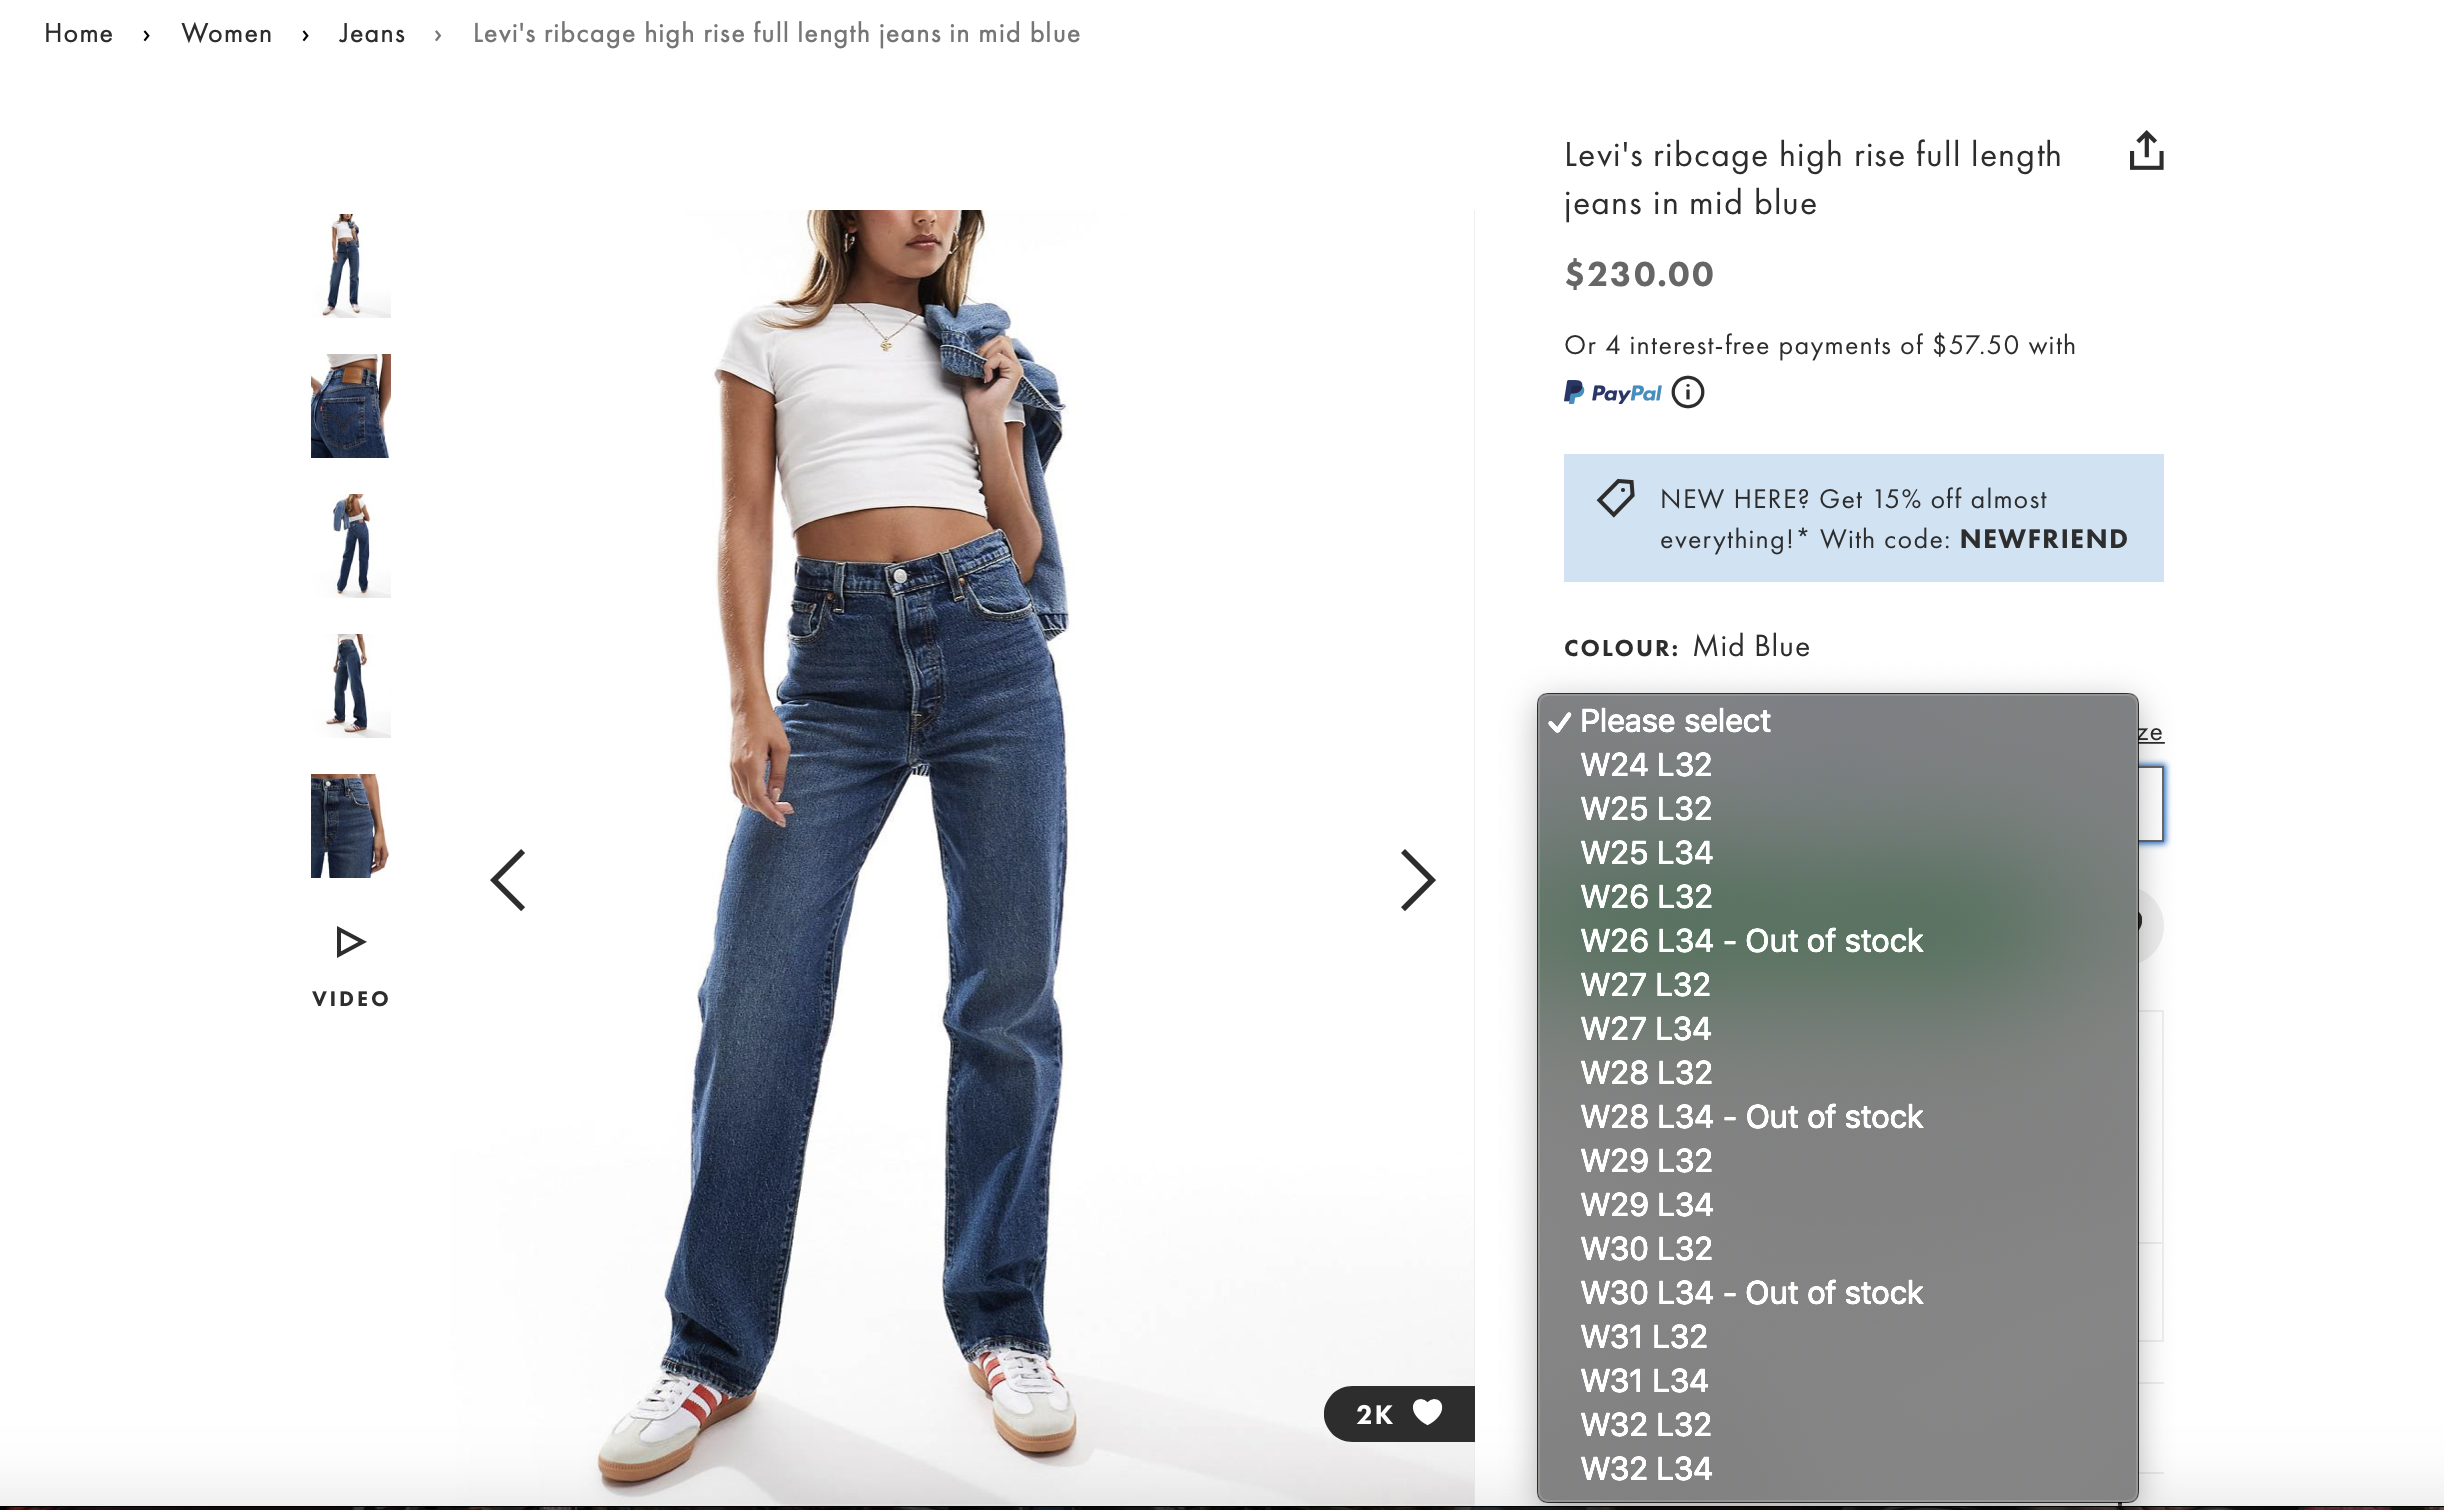 online shopping website shows remaining available sizes | SEO Sydney